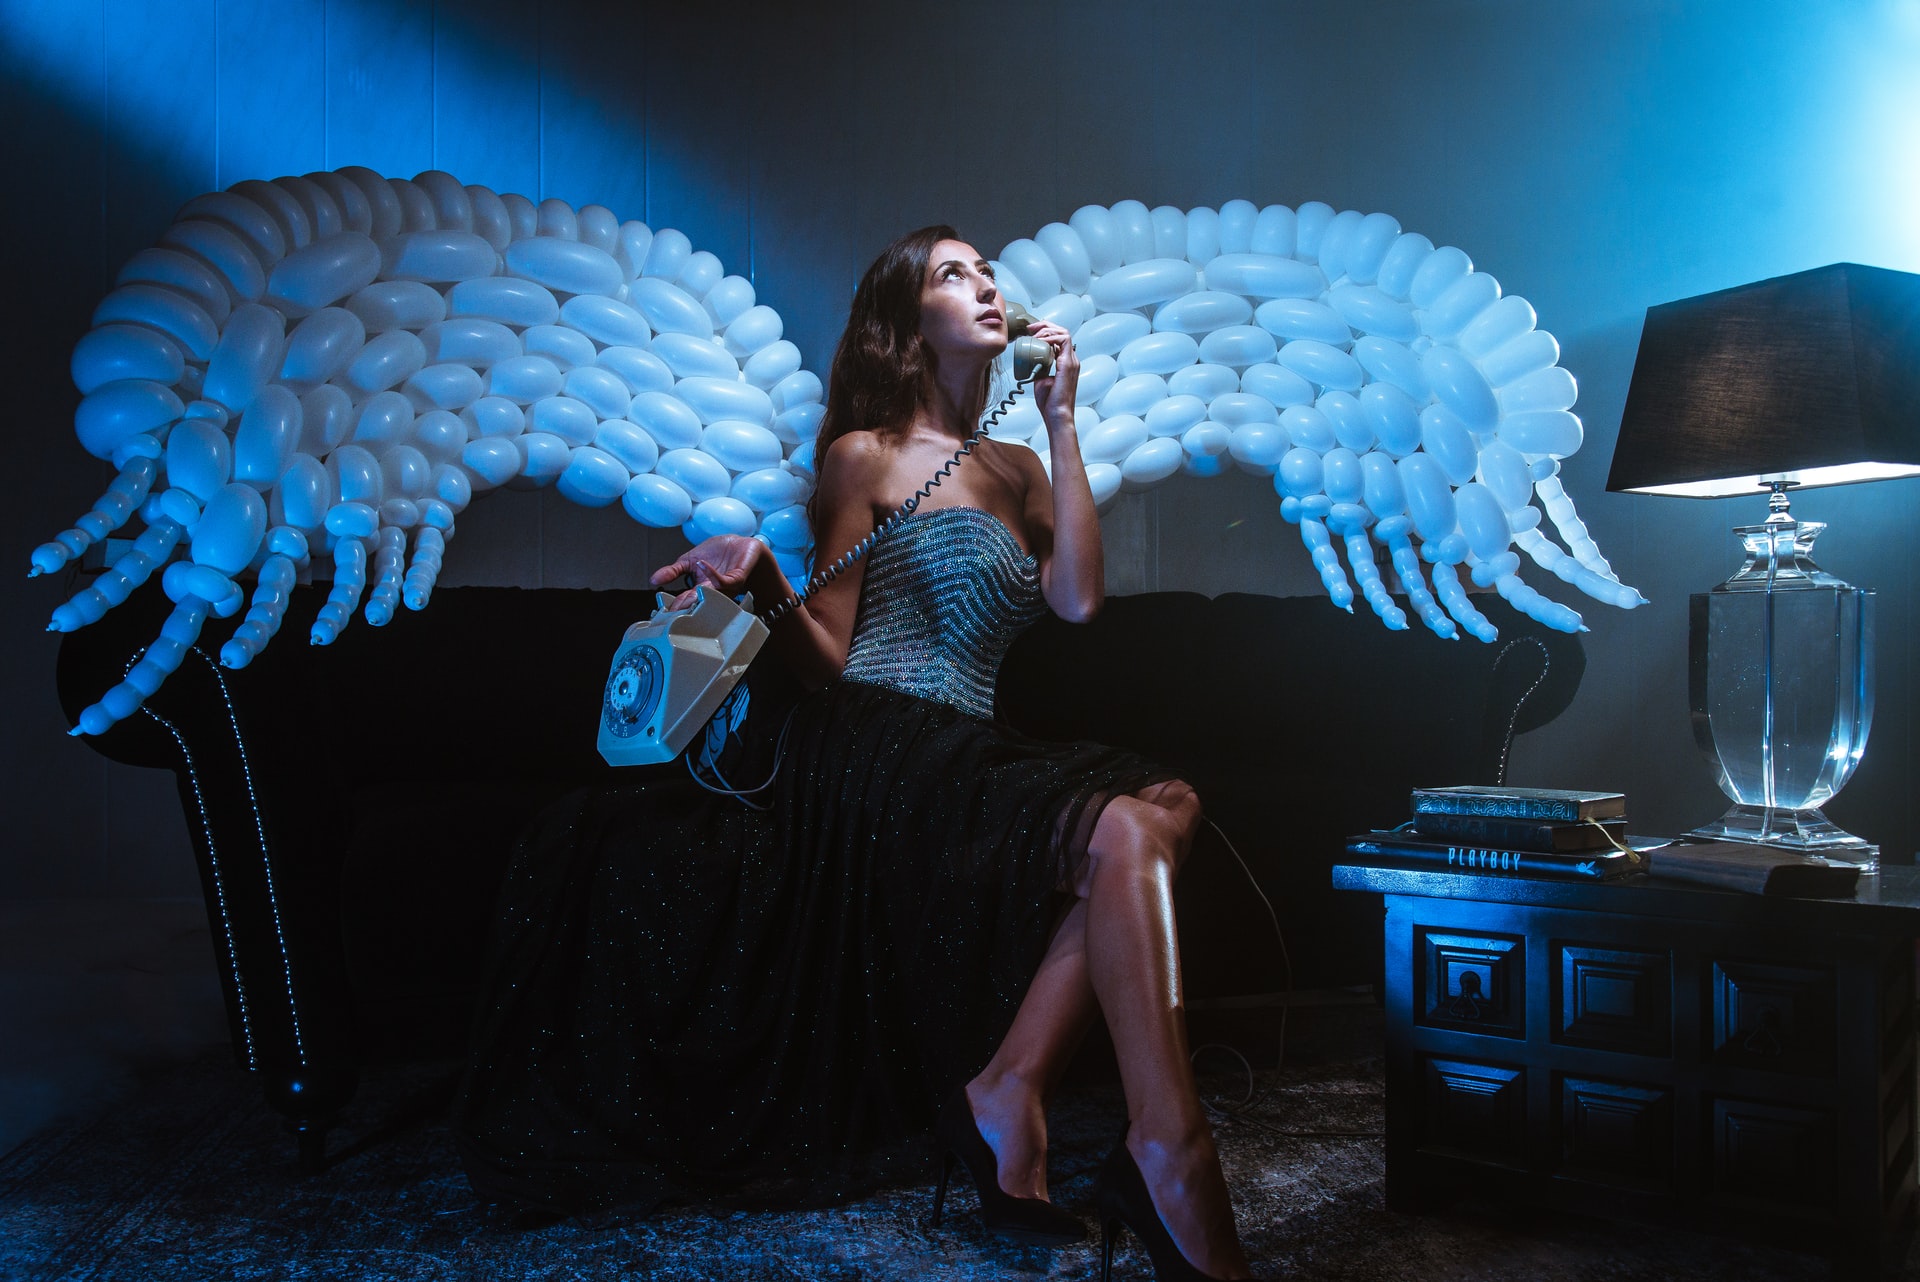 A Girl With Blue Angel Wings